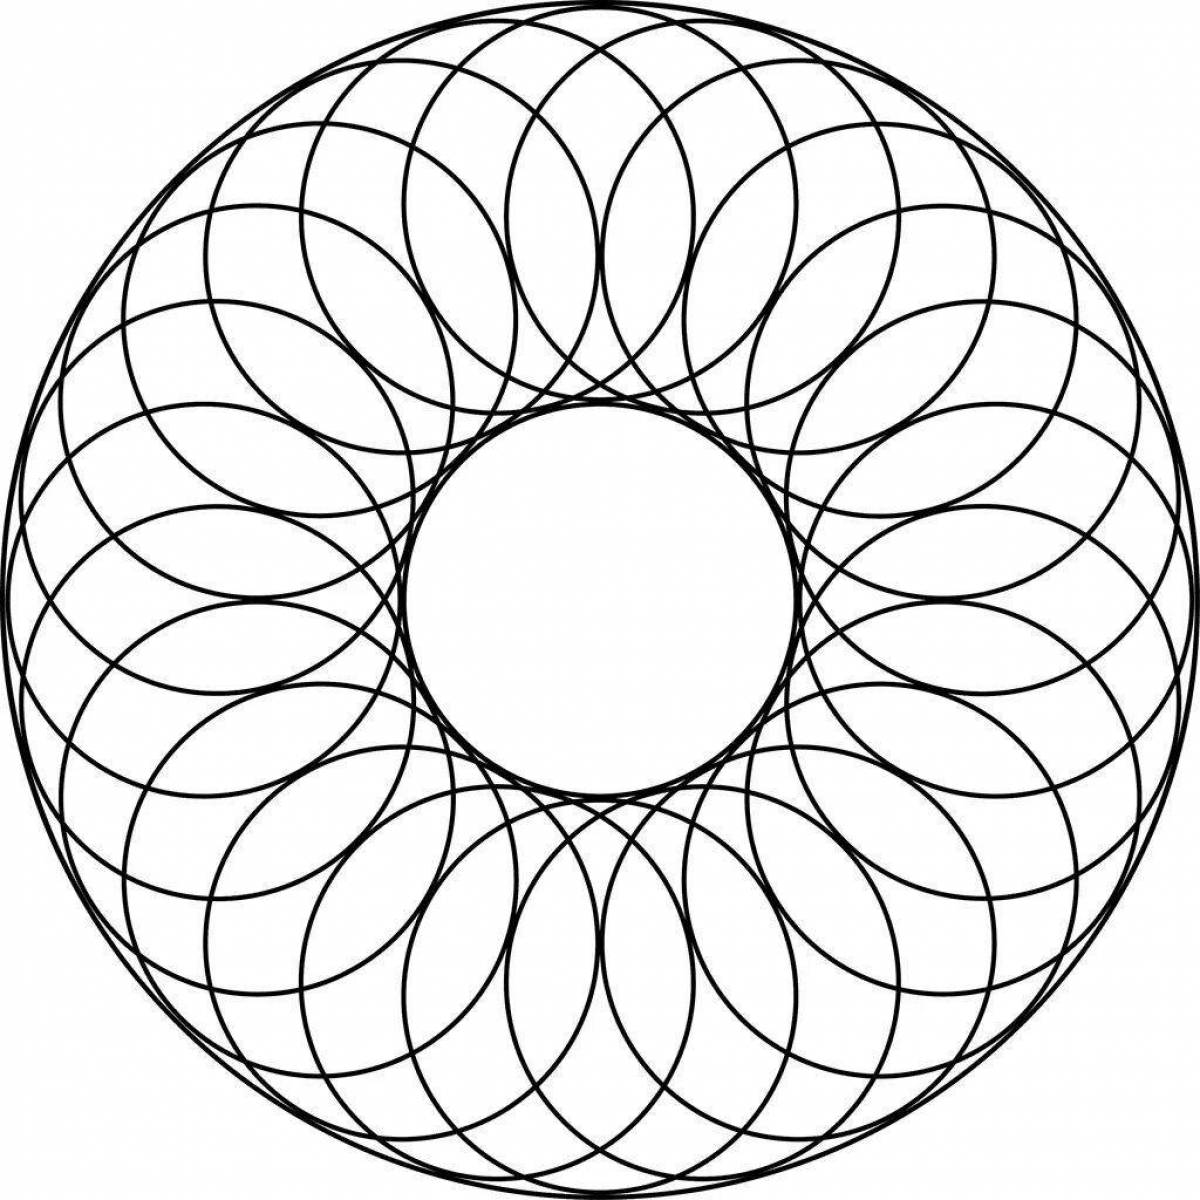 Coloring spiral with a radiant circular pattern